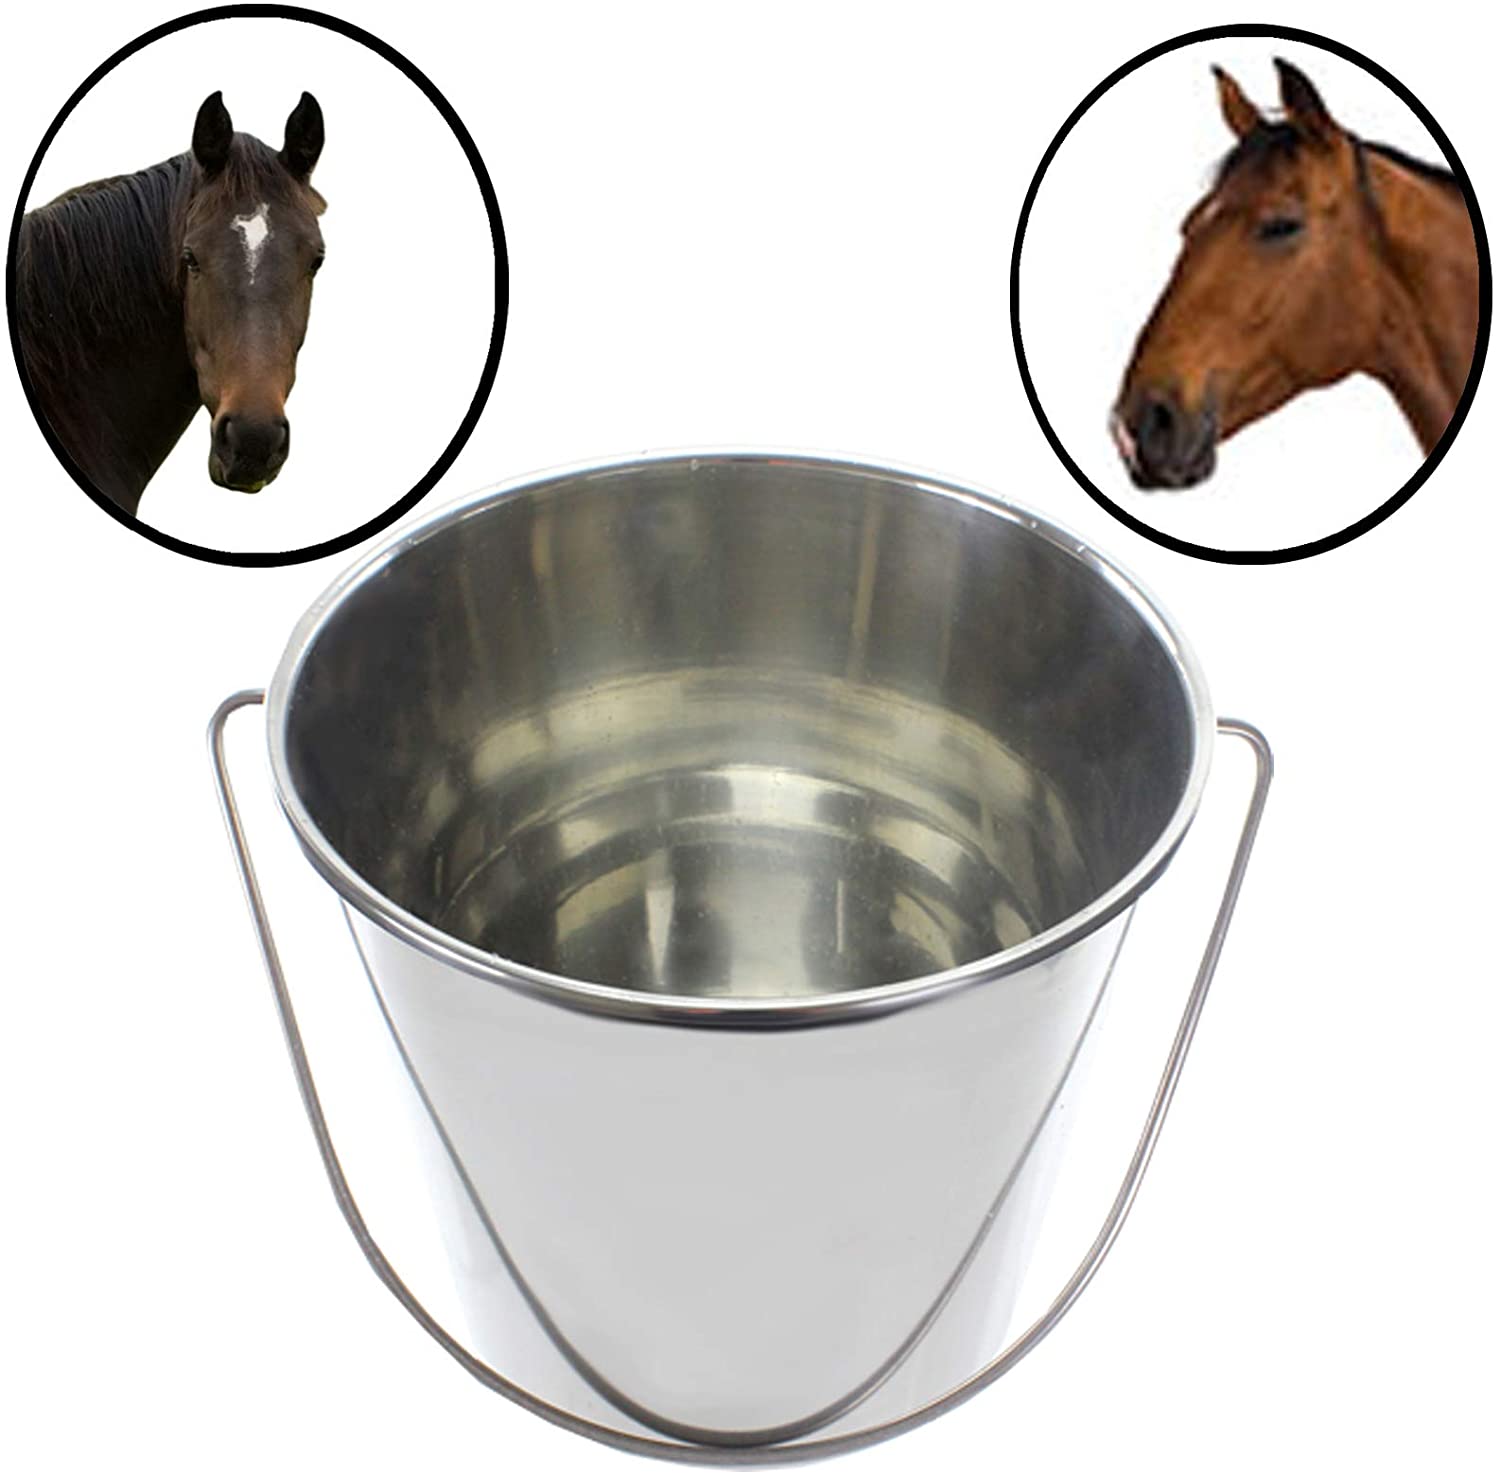 Watering Bucket for Horses Equestrian